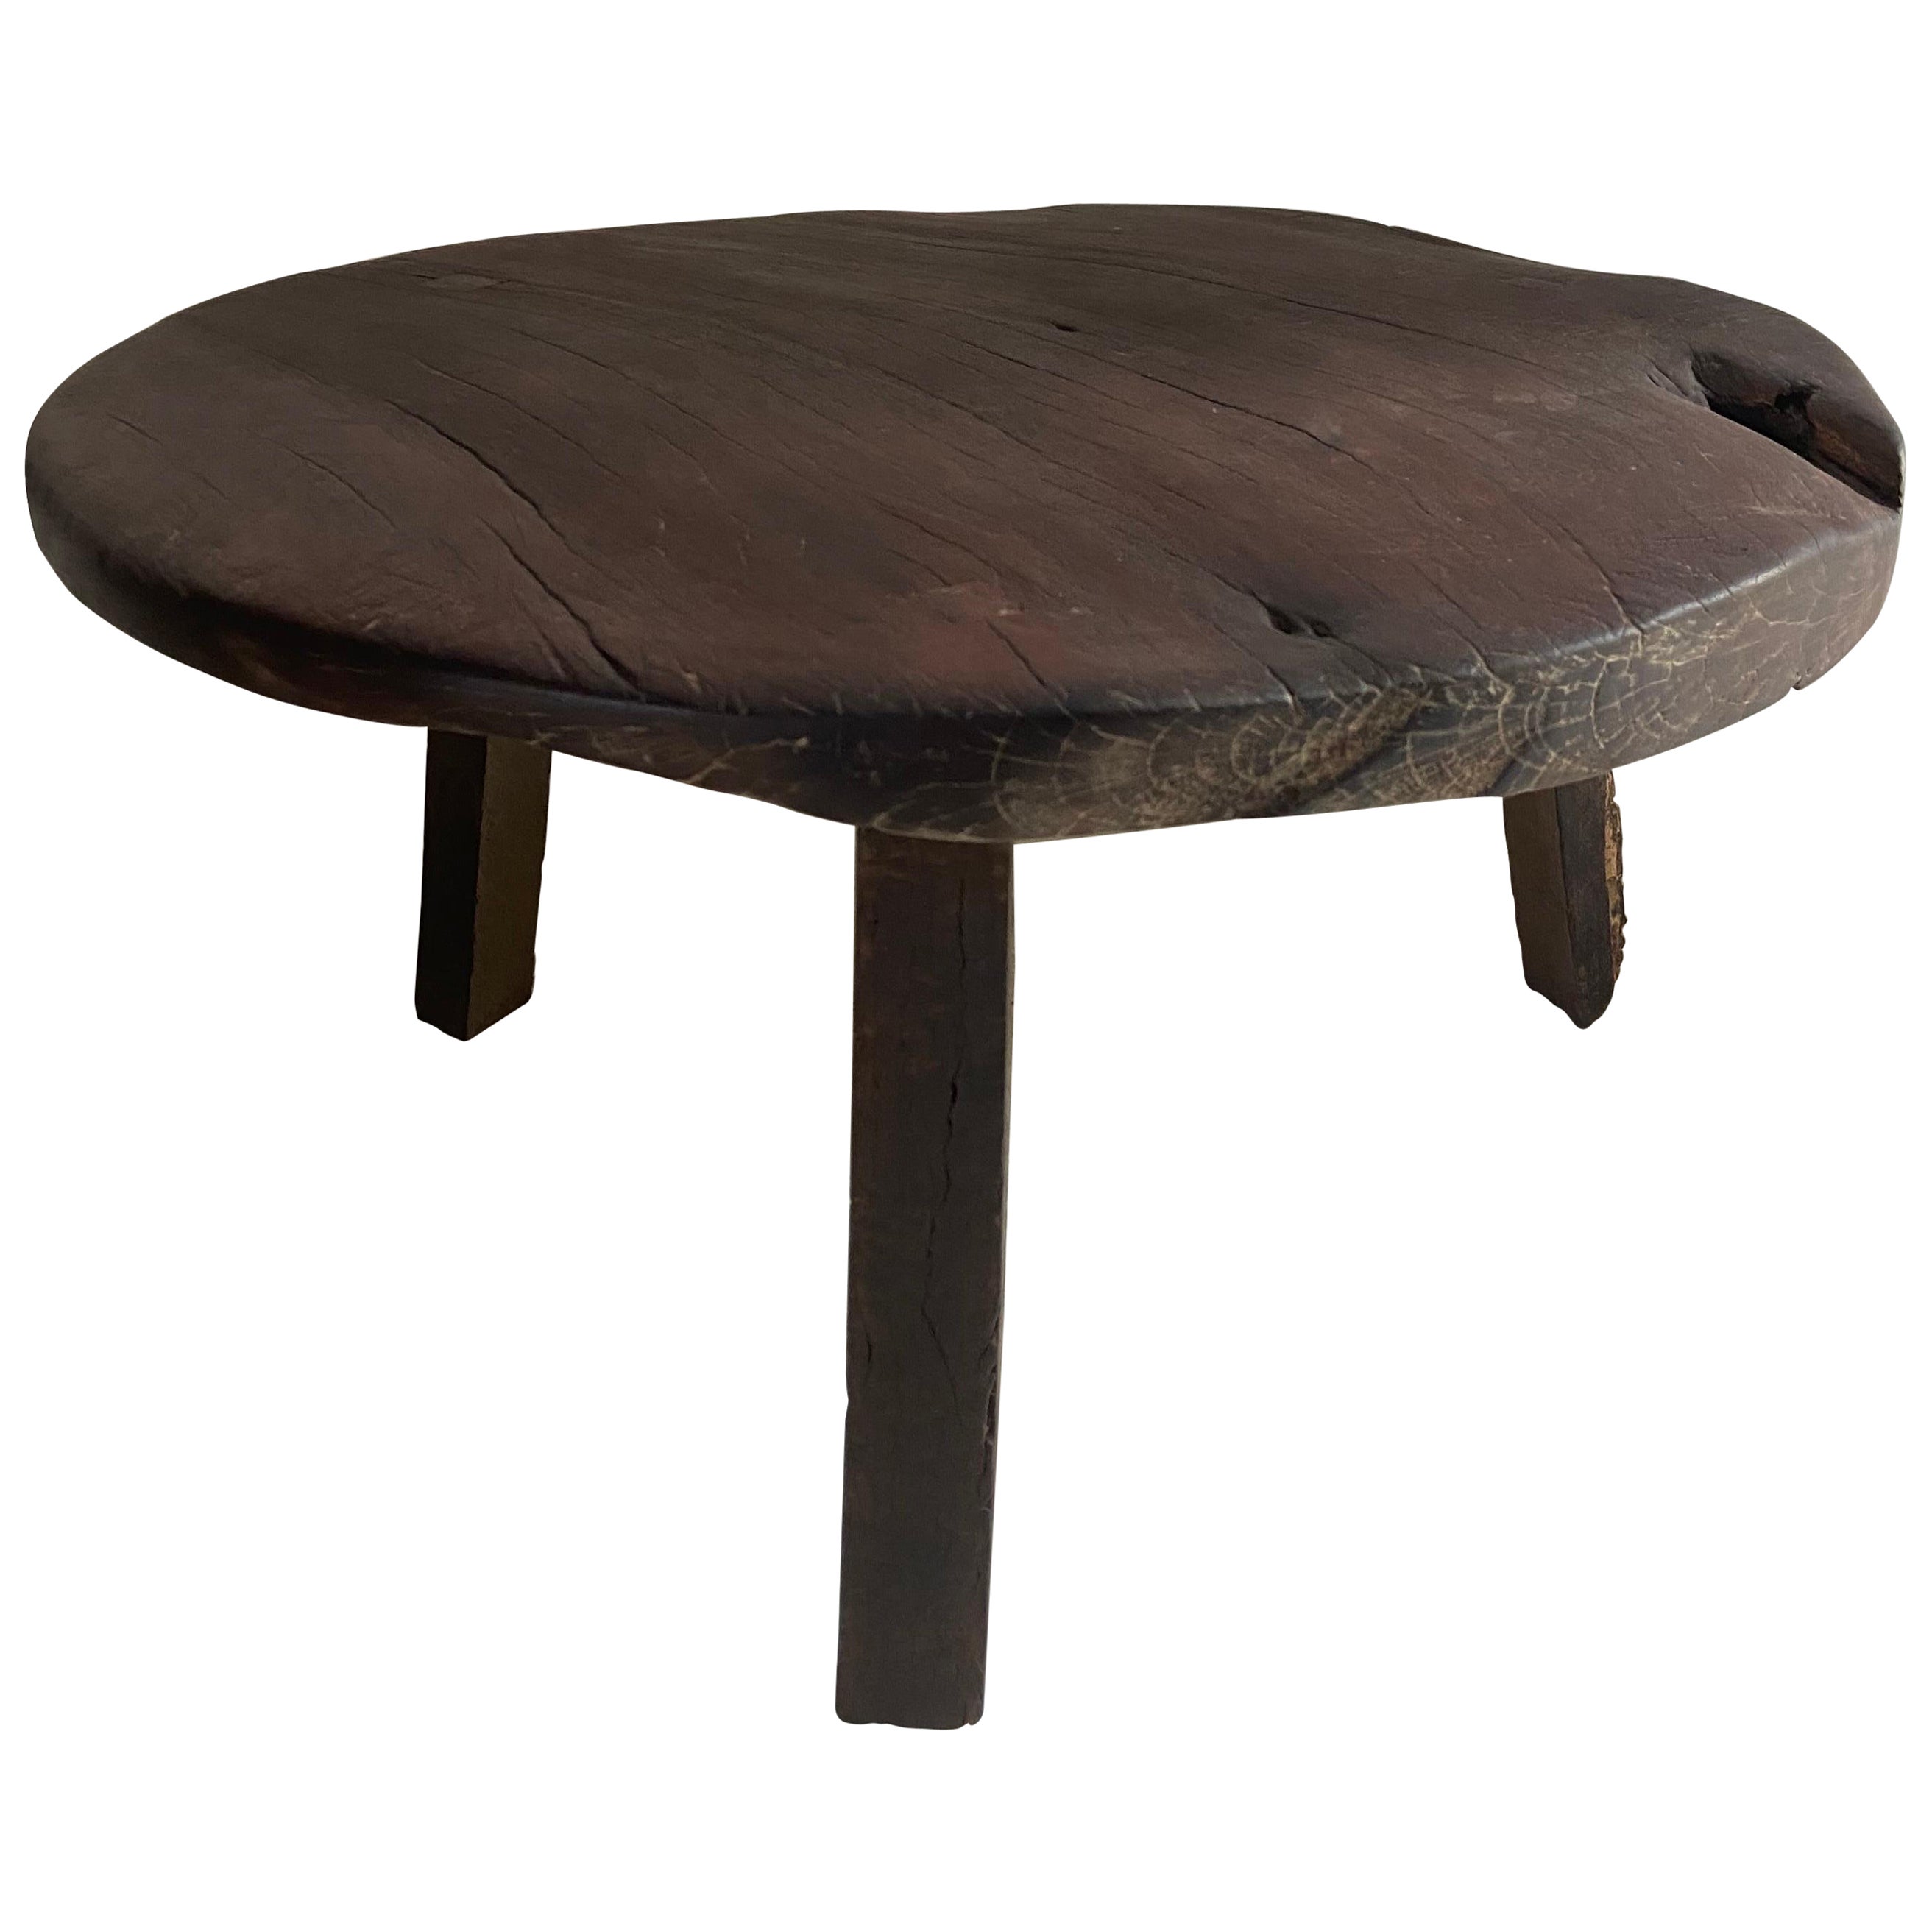 Primitive Styled Round Table from Yucatan, Mexico, Circa 1960's